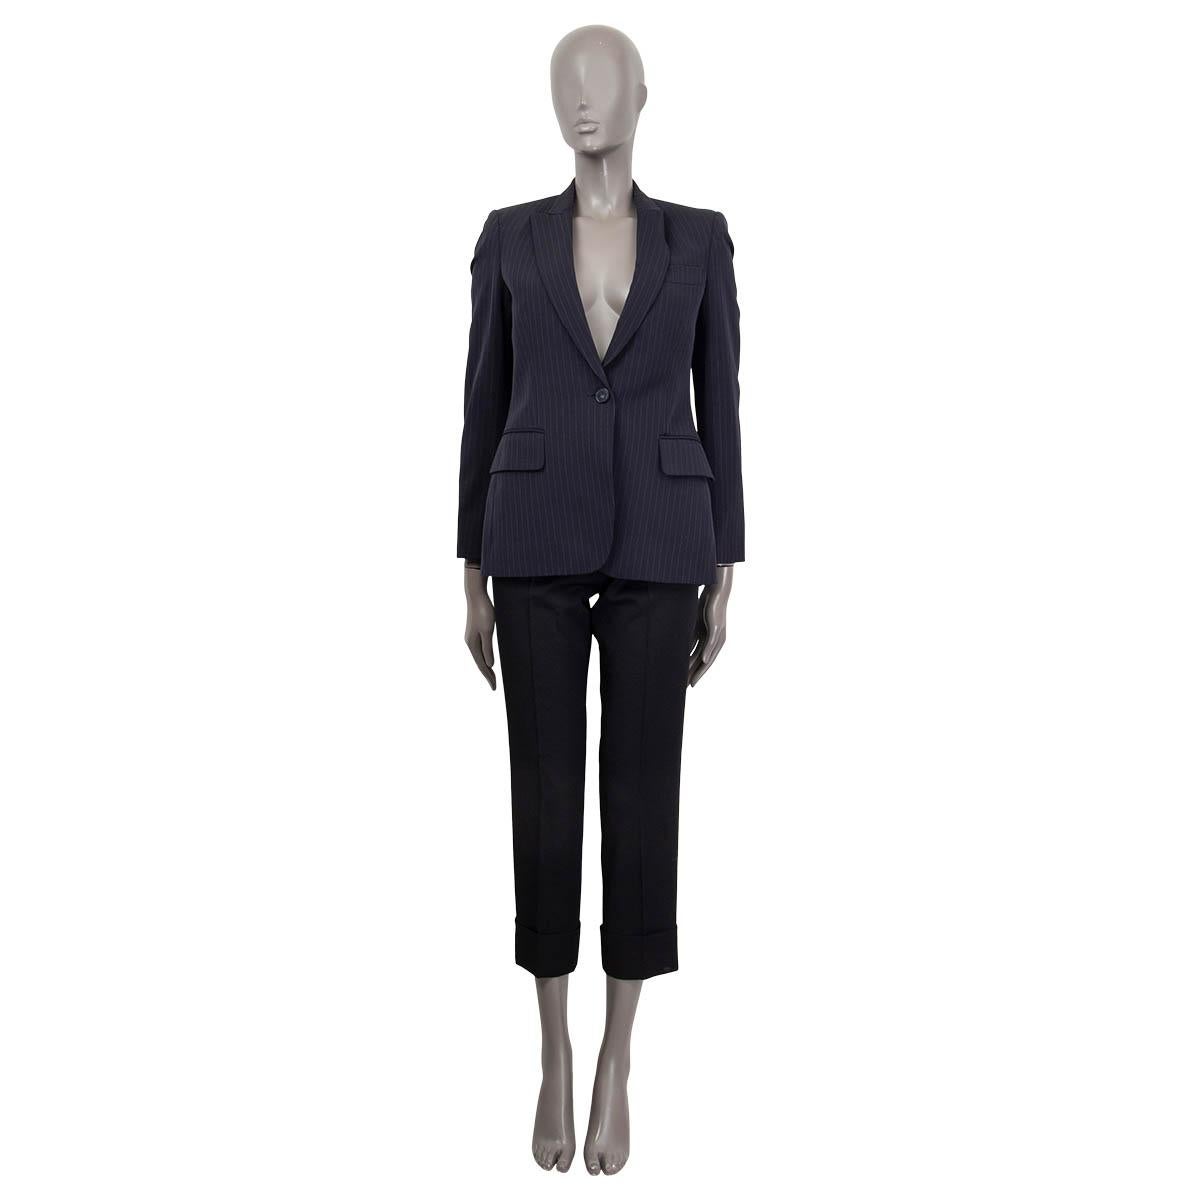 100% authentic Stella McCartney Peak Lapel Pin-Stripe Blazer in navy wool (99%) and polyester (1%). Lined in navy rayon (52%) and cotton (48%). Blazer closes with one button and features two flap pockets and one chest pocket at front. Has padded